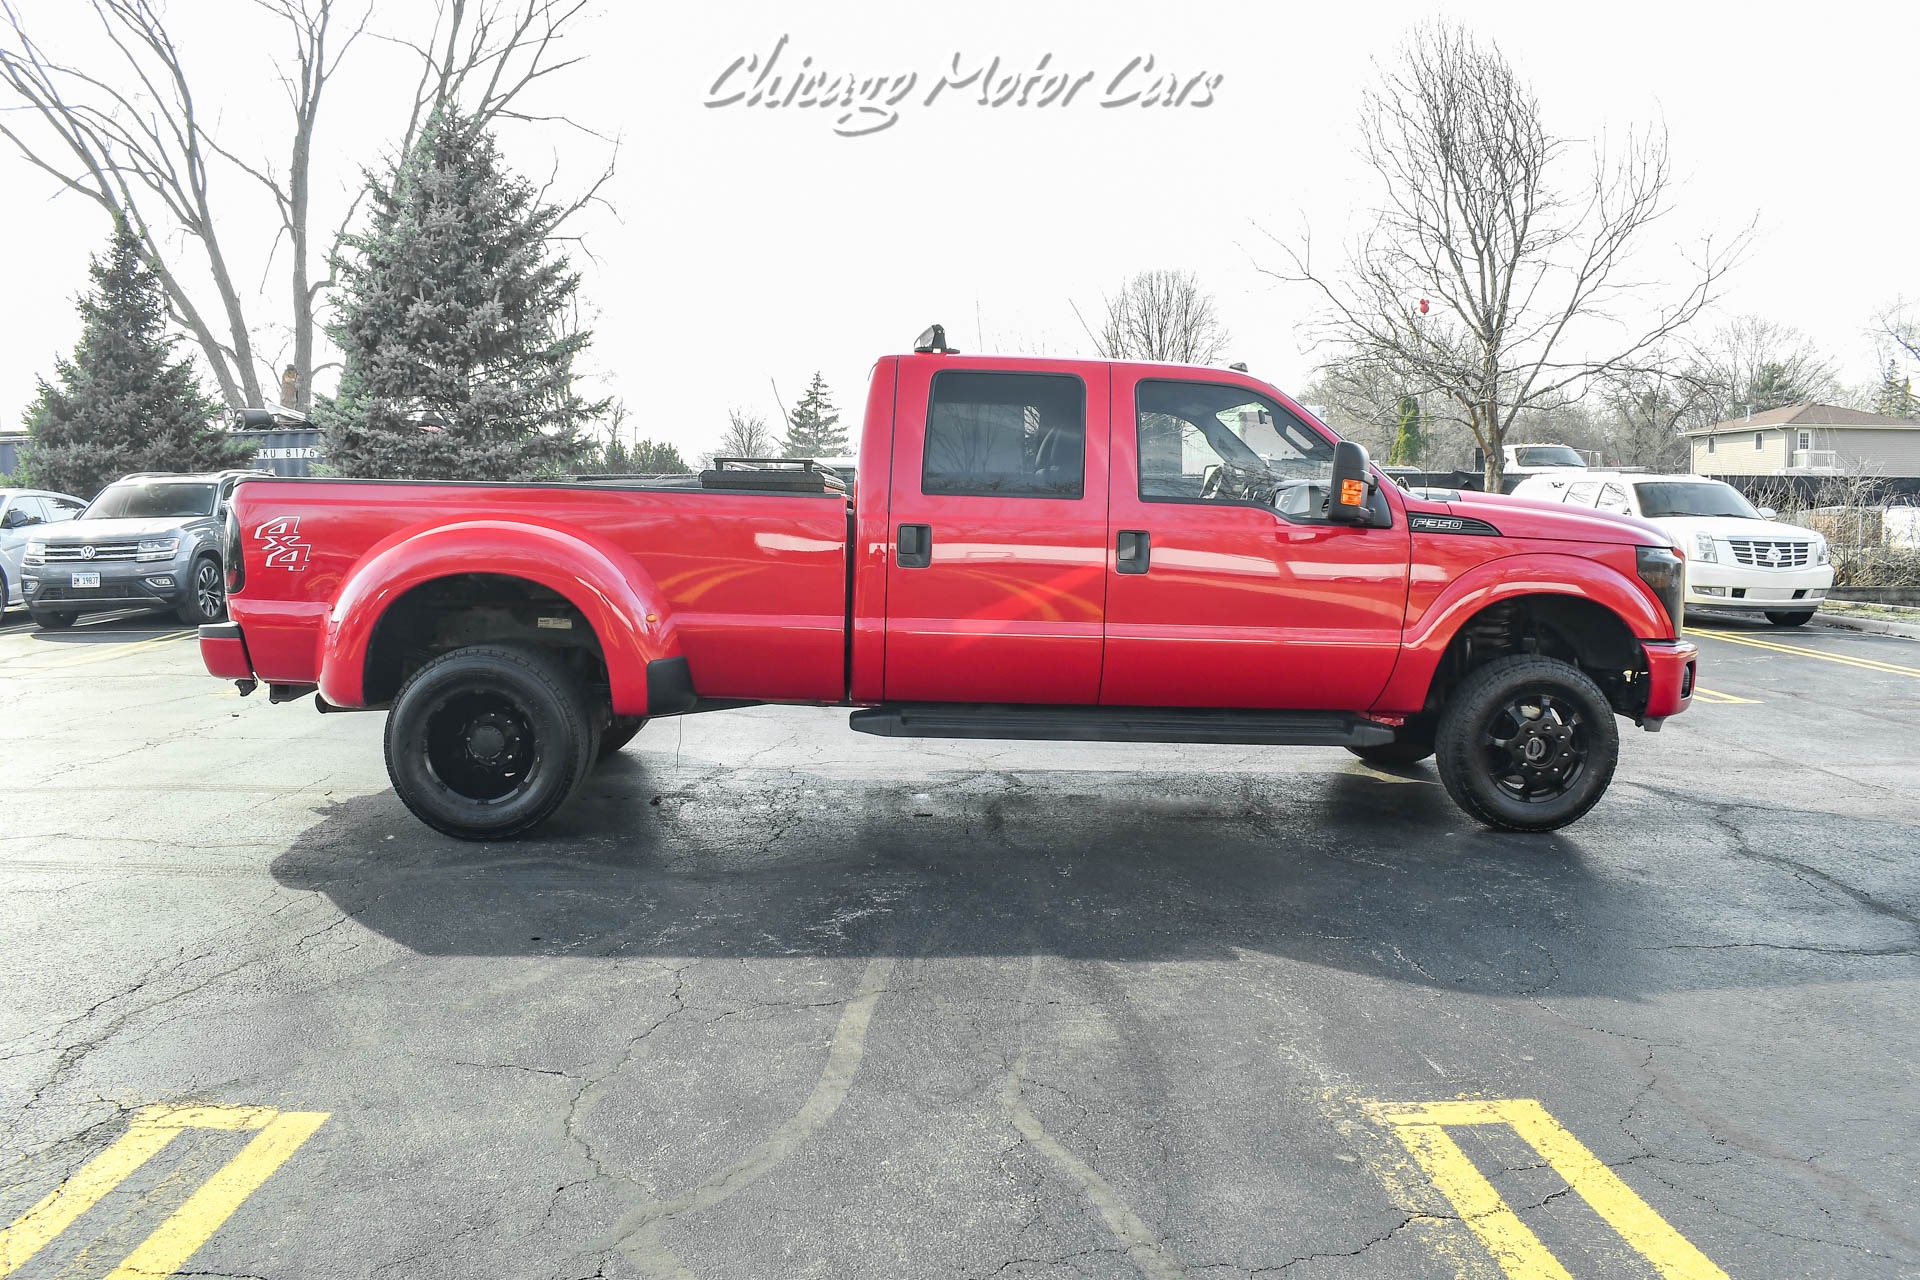 Used-2013-Ford-F-350-Super-Duty-Dually-XL-4X4-Crewcab-Pickup-62L-V8-Cruise-Control-Power-Equipment-Group